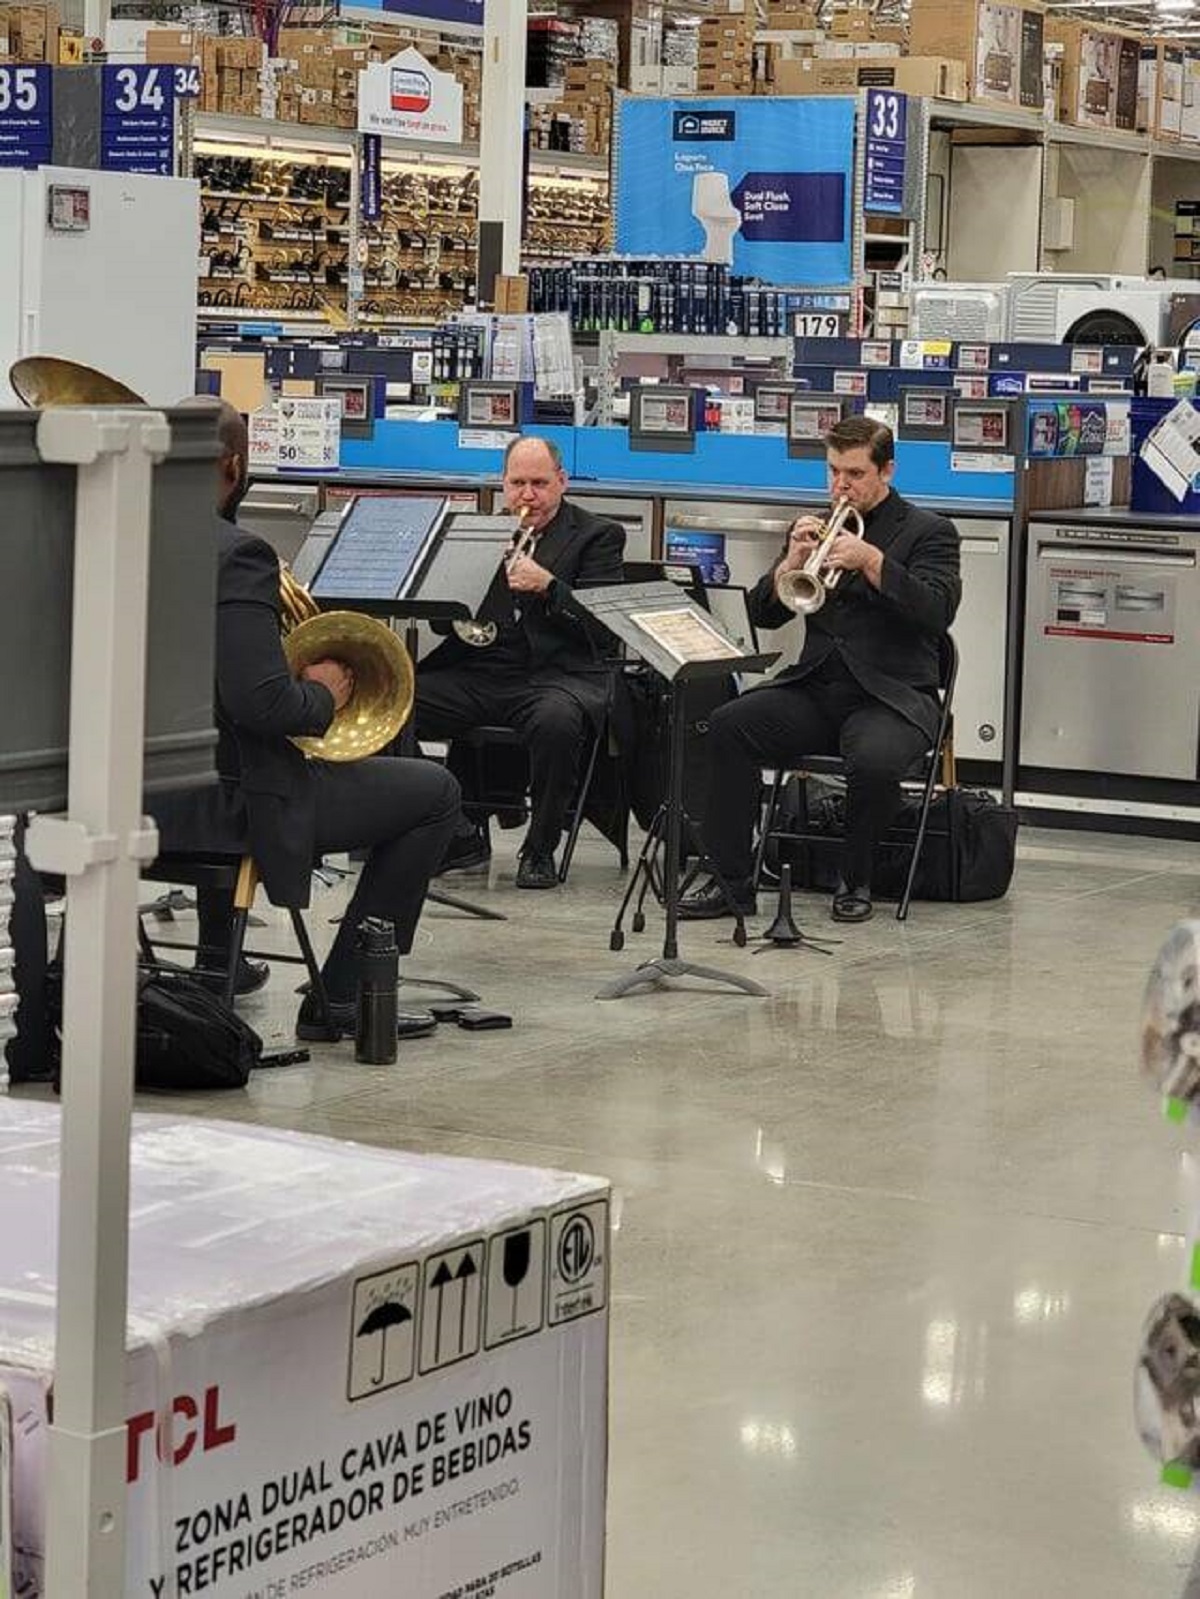 "There is a small orchestra ensemble playing christmas music in the lowes im in"